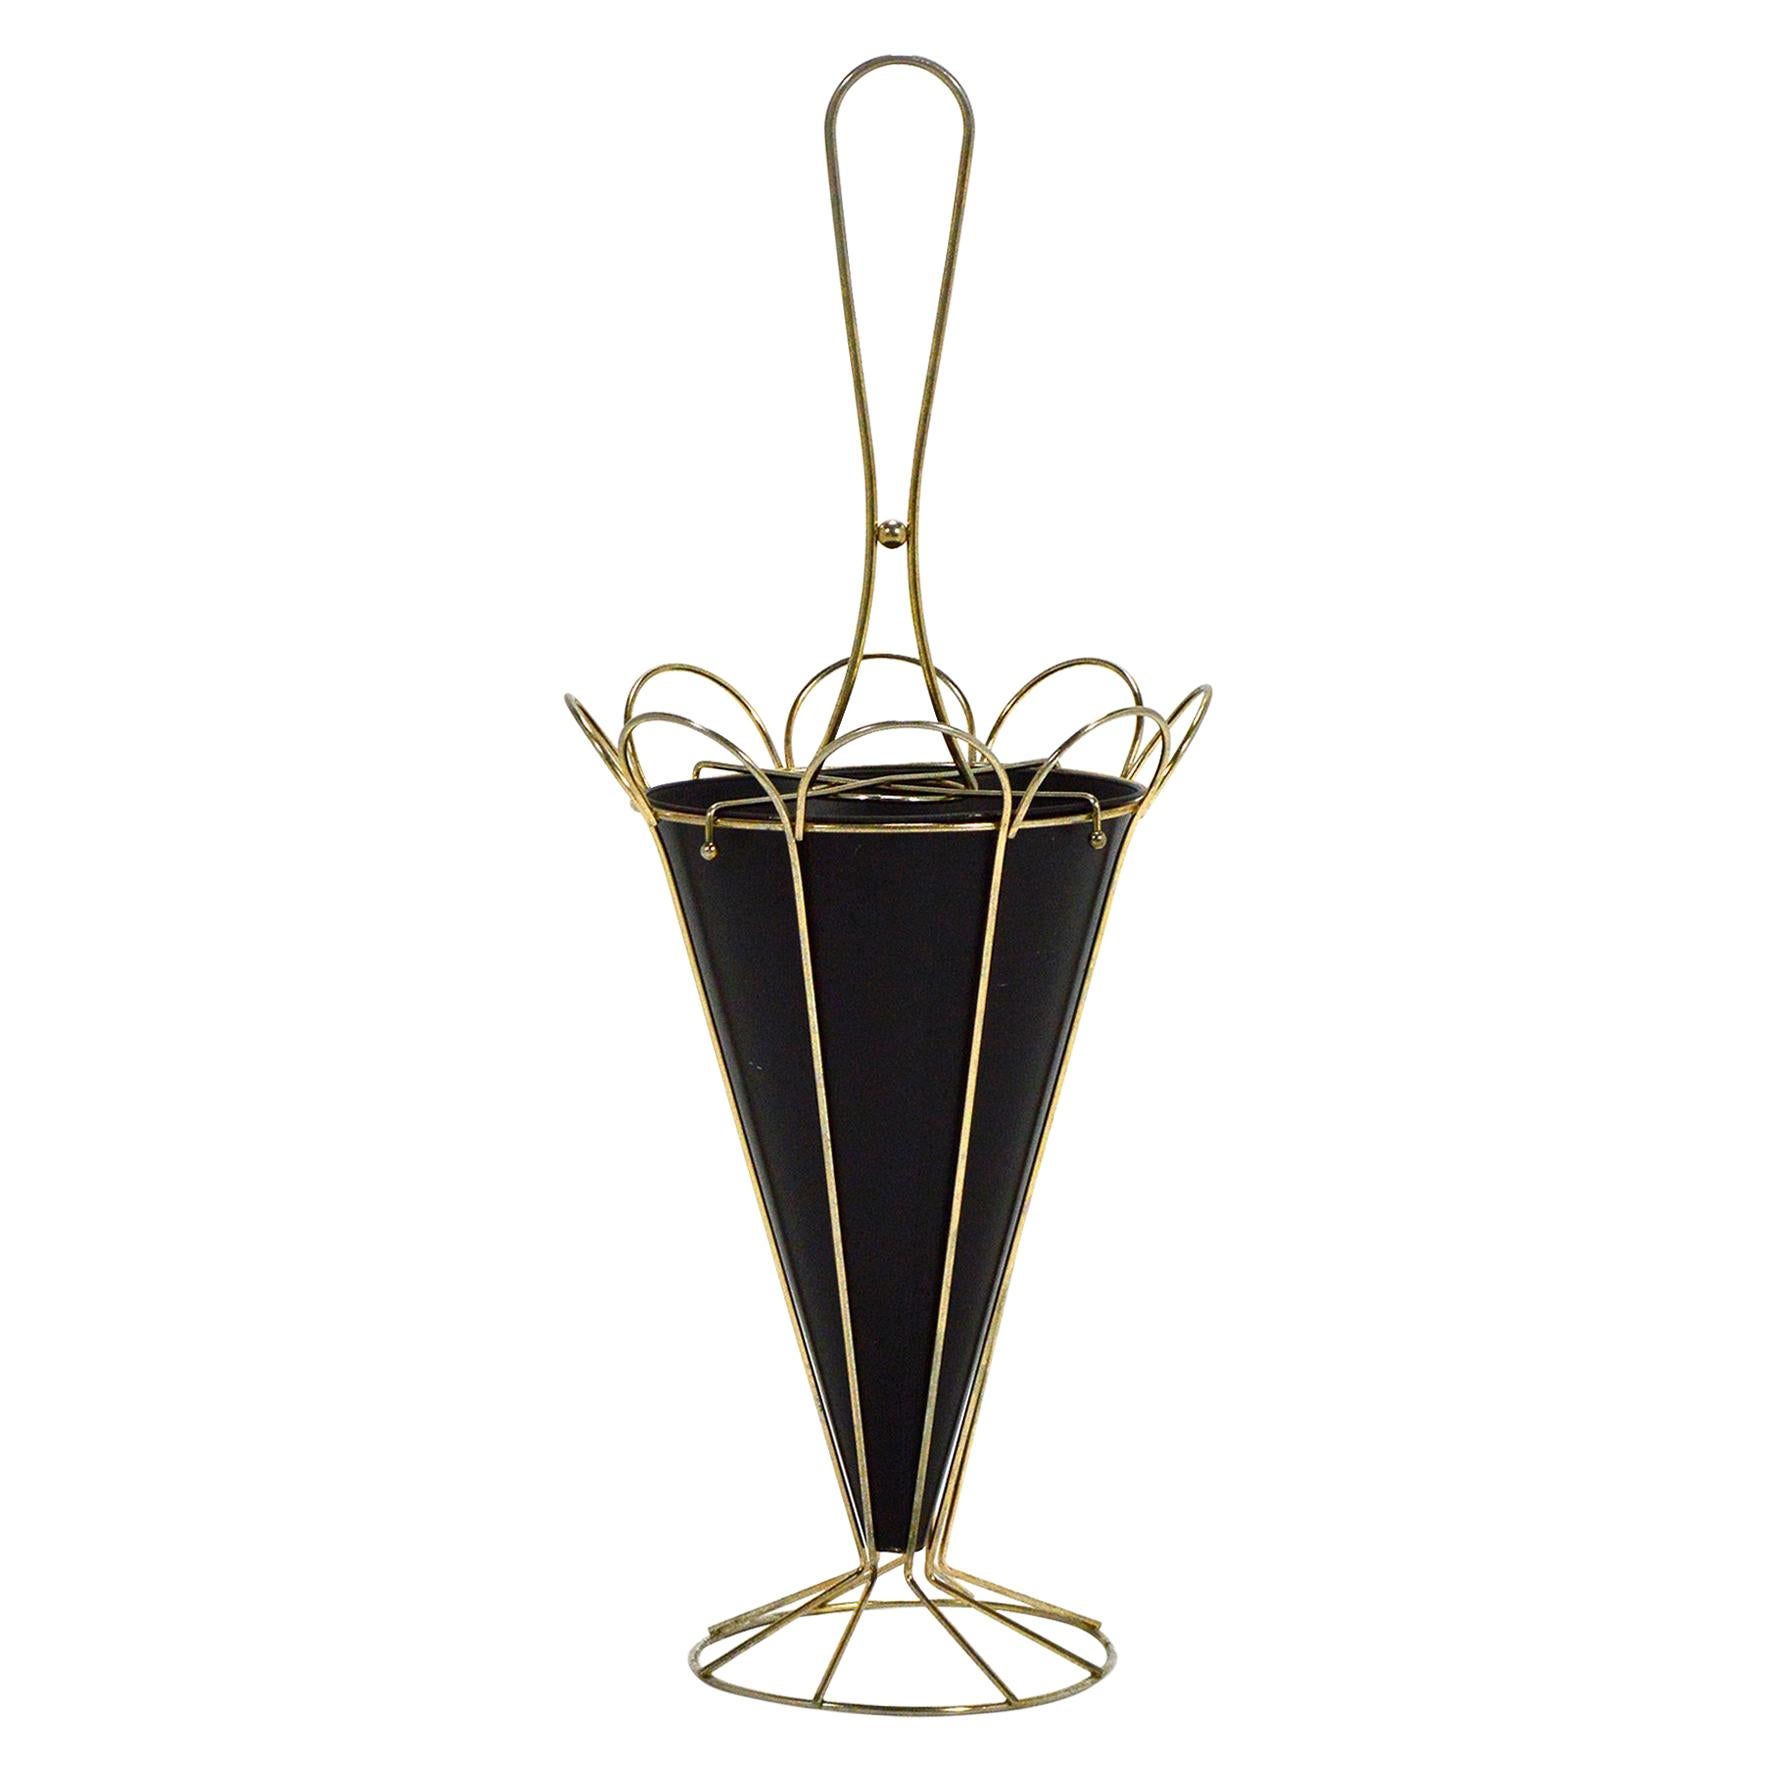 Whimsical Brass Umbrella Stand For Sale